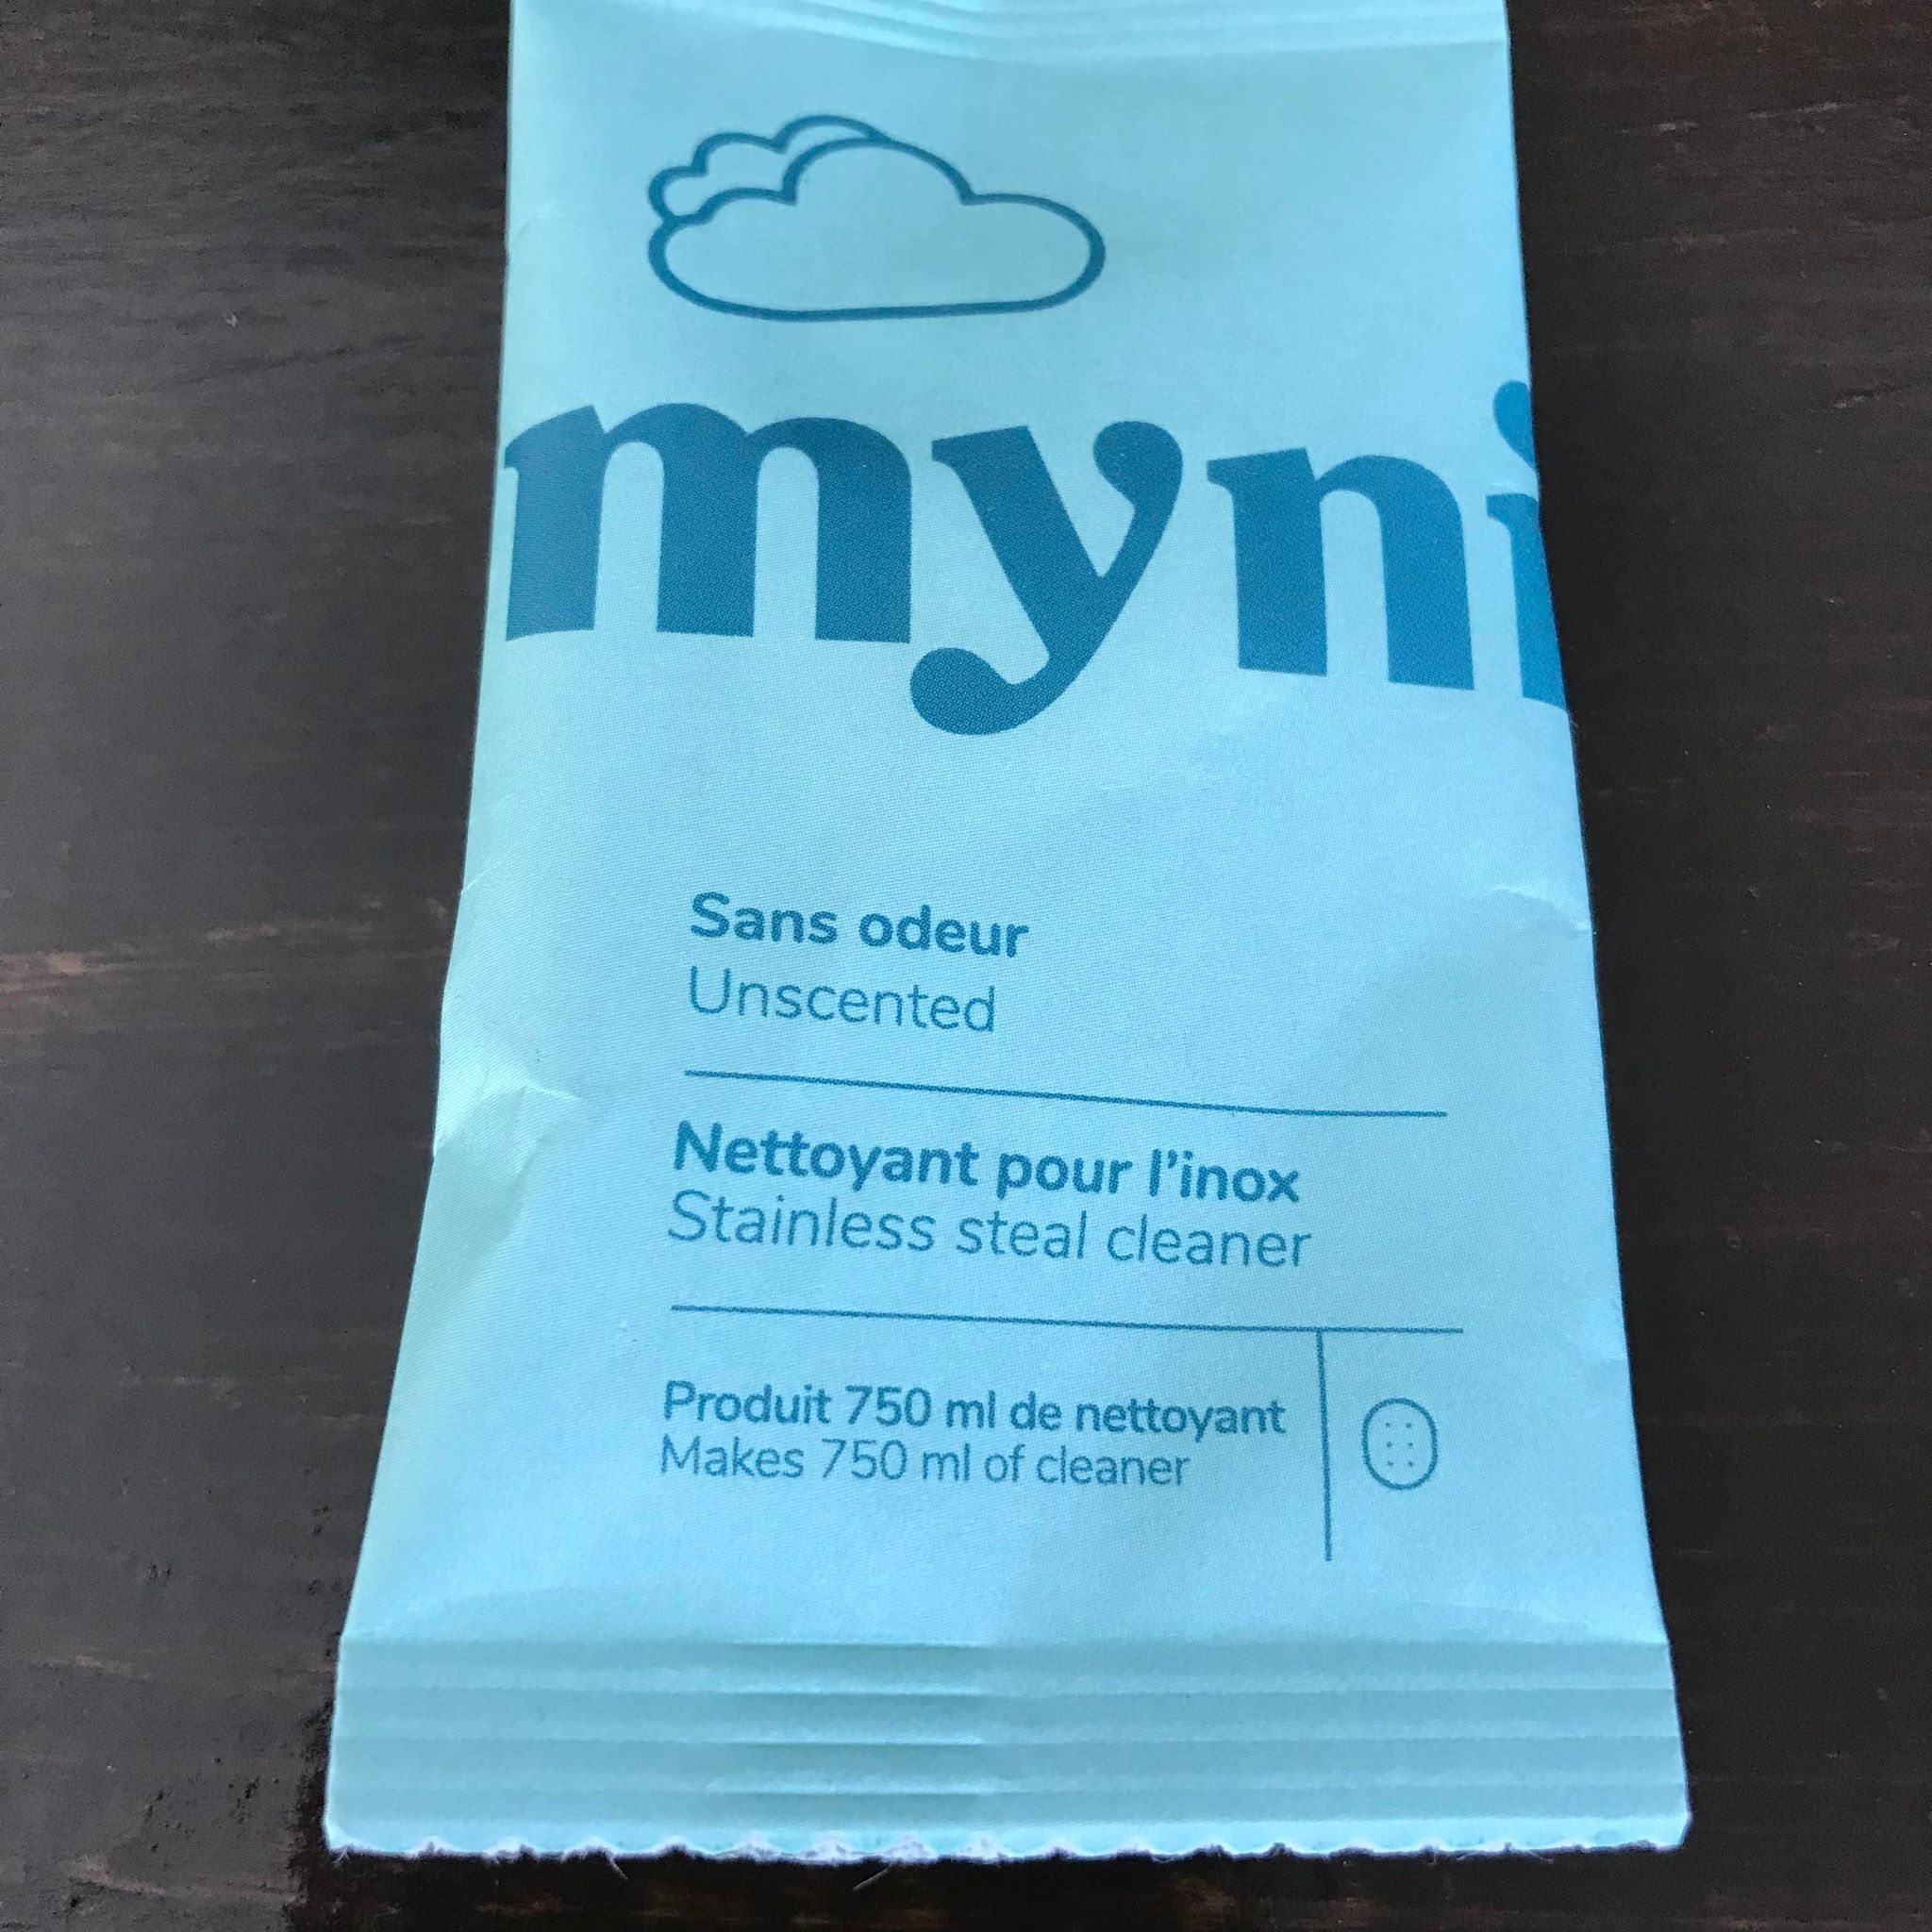 An individual unscented stainless steel cleaner tablet in compostable pouch made in Canada by myni makes up to 750 ml of cleaner just by adding water and a tablet to a spray bottle